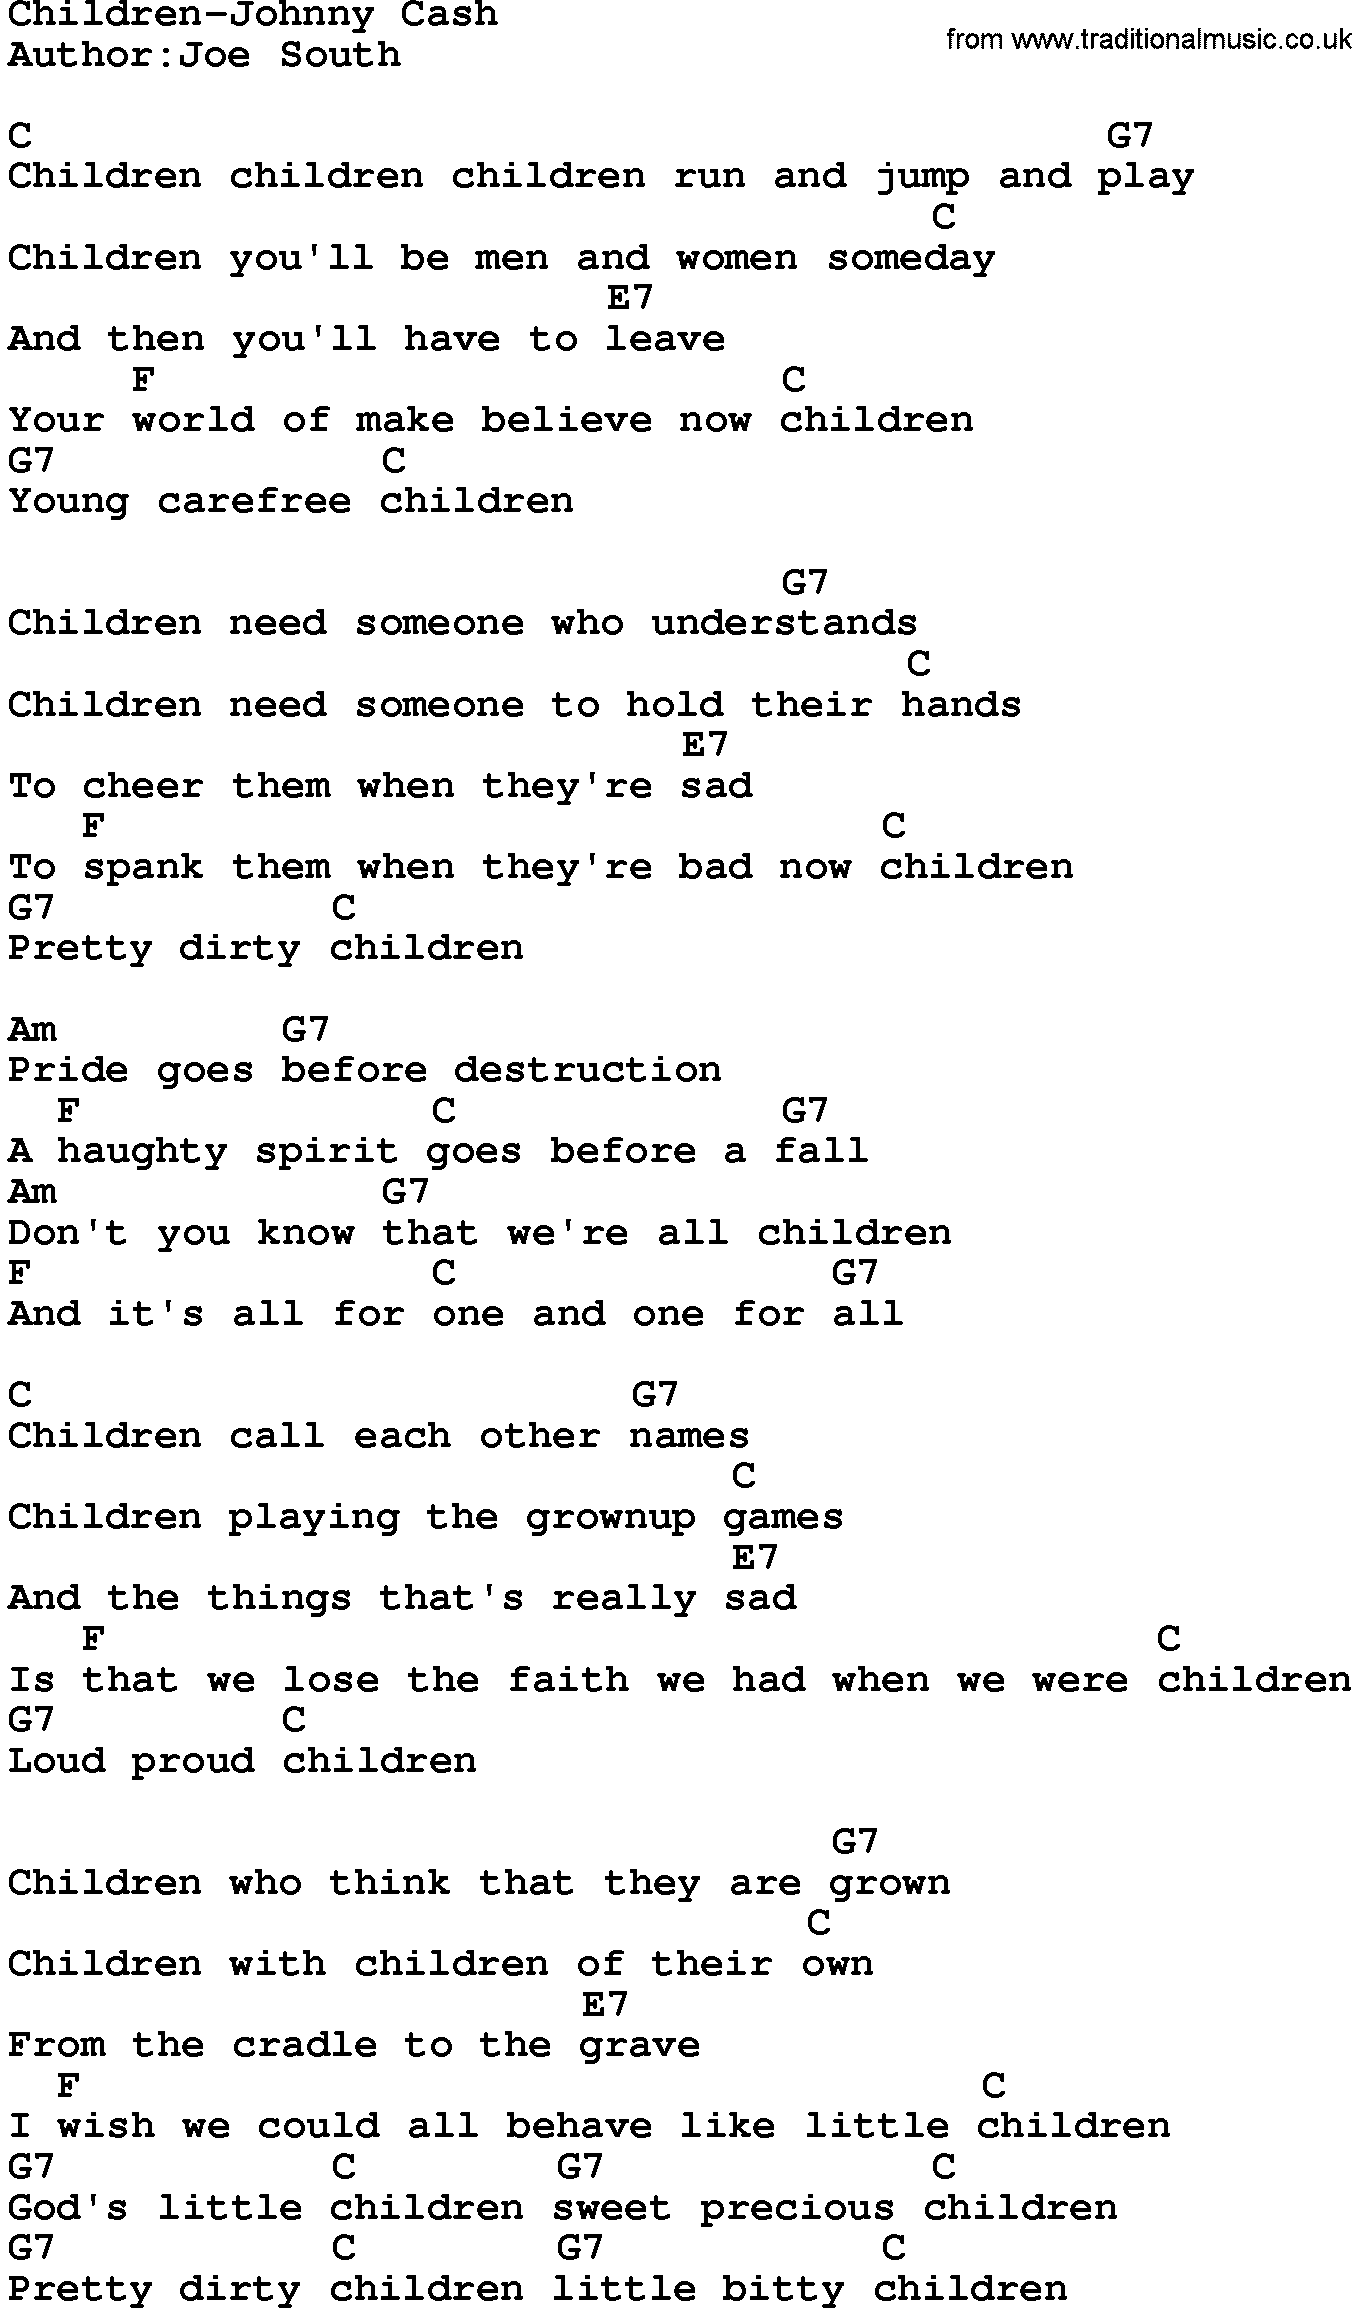 Country music song: Children-Johnny Cash lyrics and chords